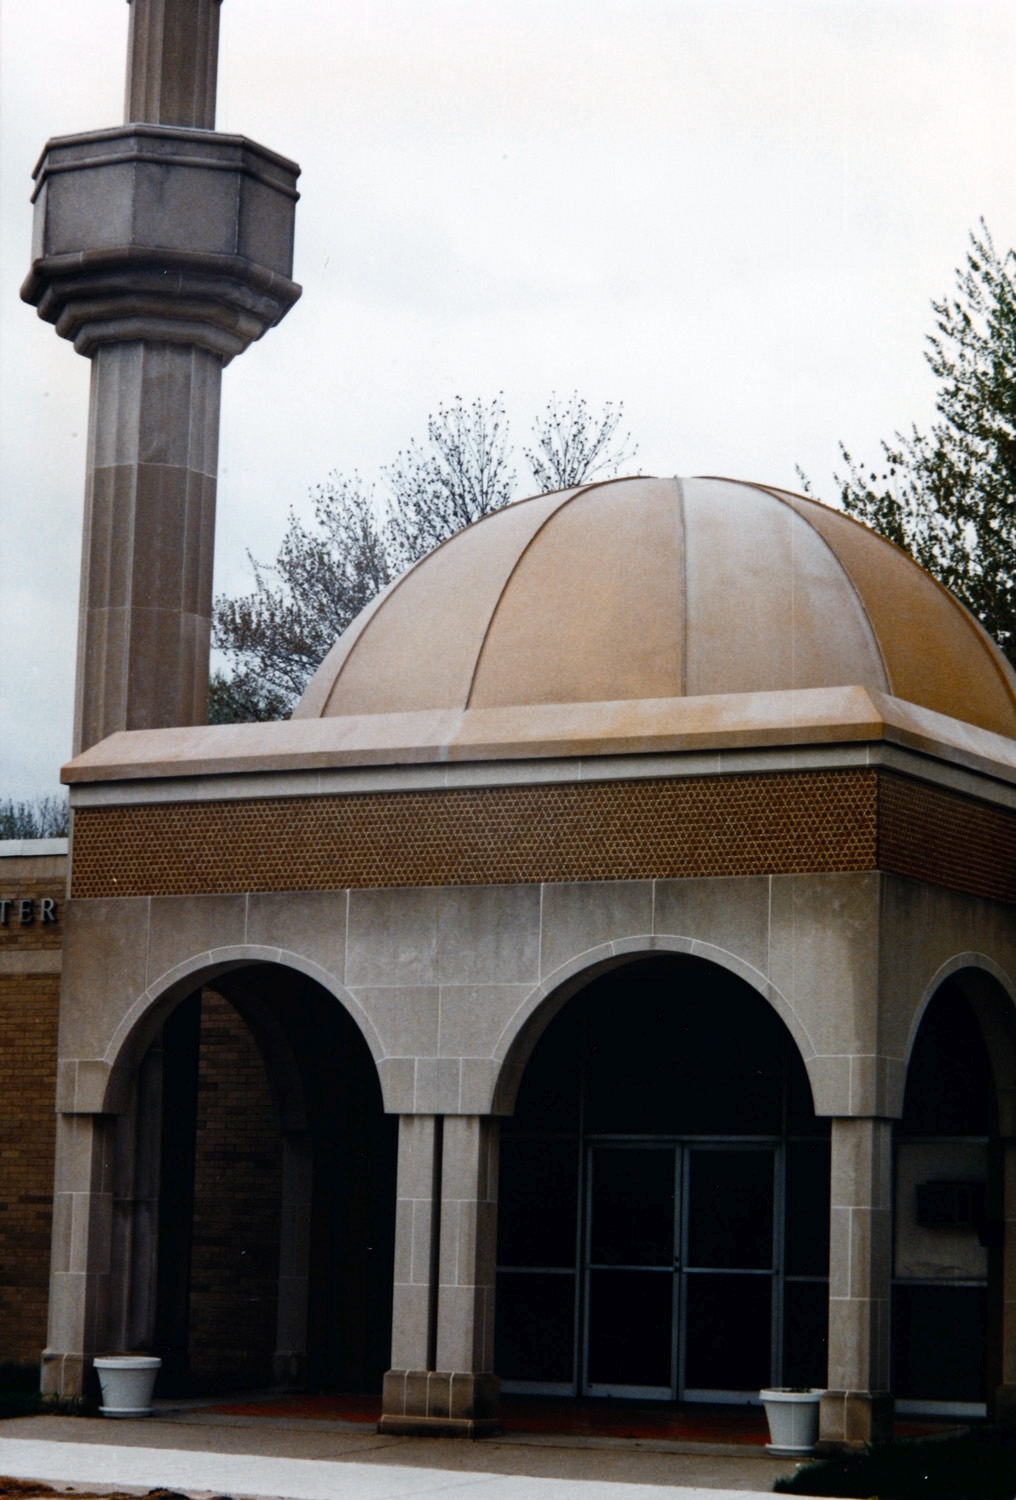 Albanian Islamic Center - Detail of front entrance with dome and partial view of minaret